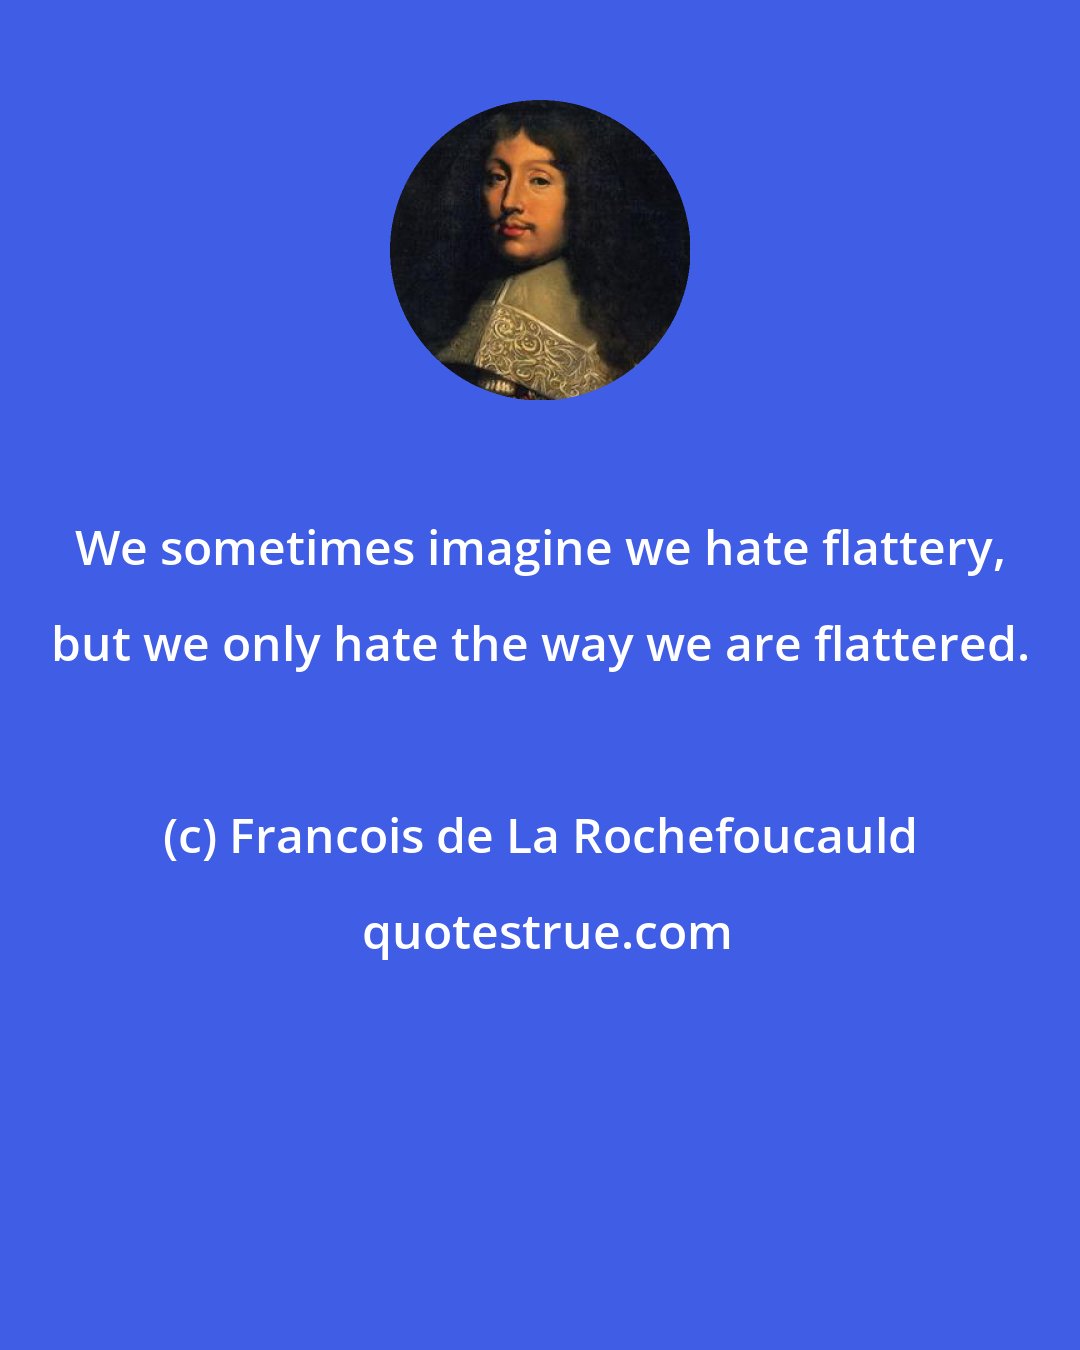 Francois de La Rochefoucauld: We sometimes imagine we hate flattery, but we only hate the way we are flattered.